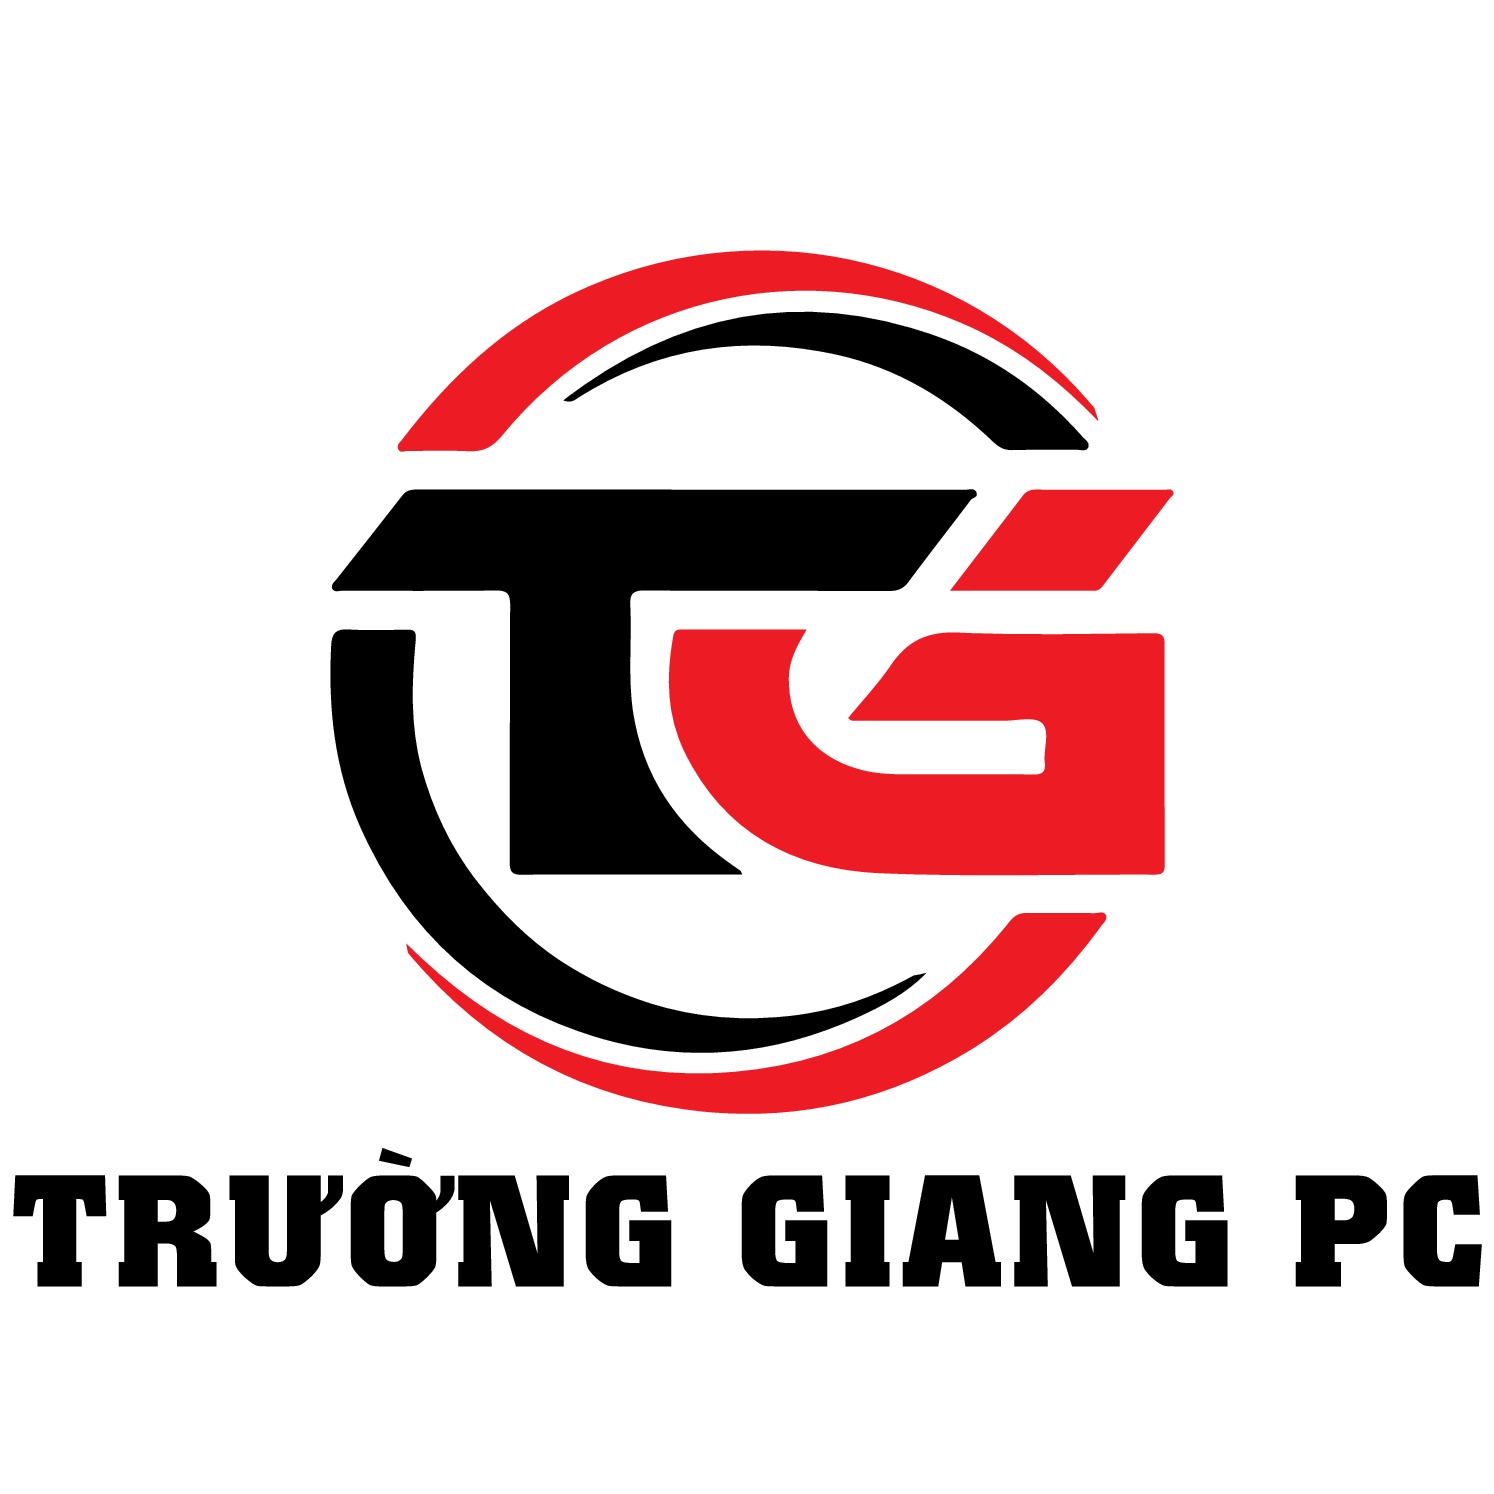 Trường Giang PC